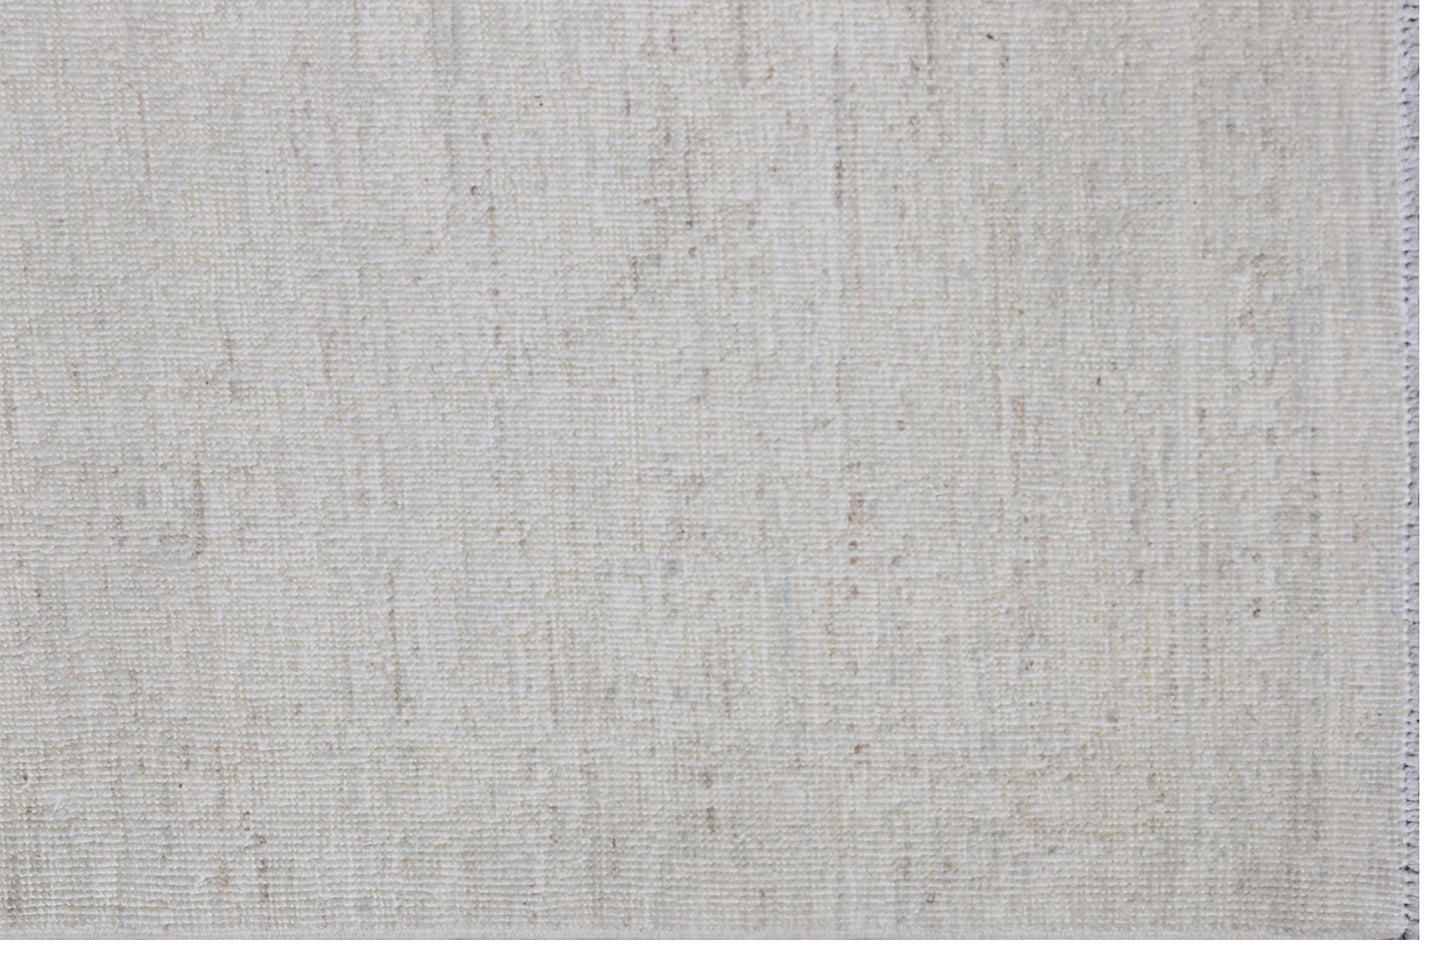 3'x12' Ariana Transitional Washed-Out Runner Rug